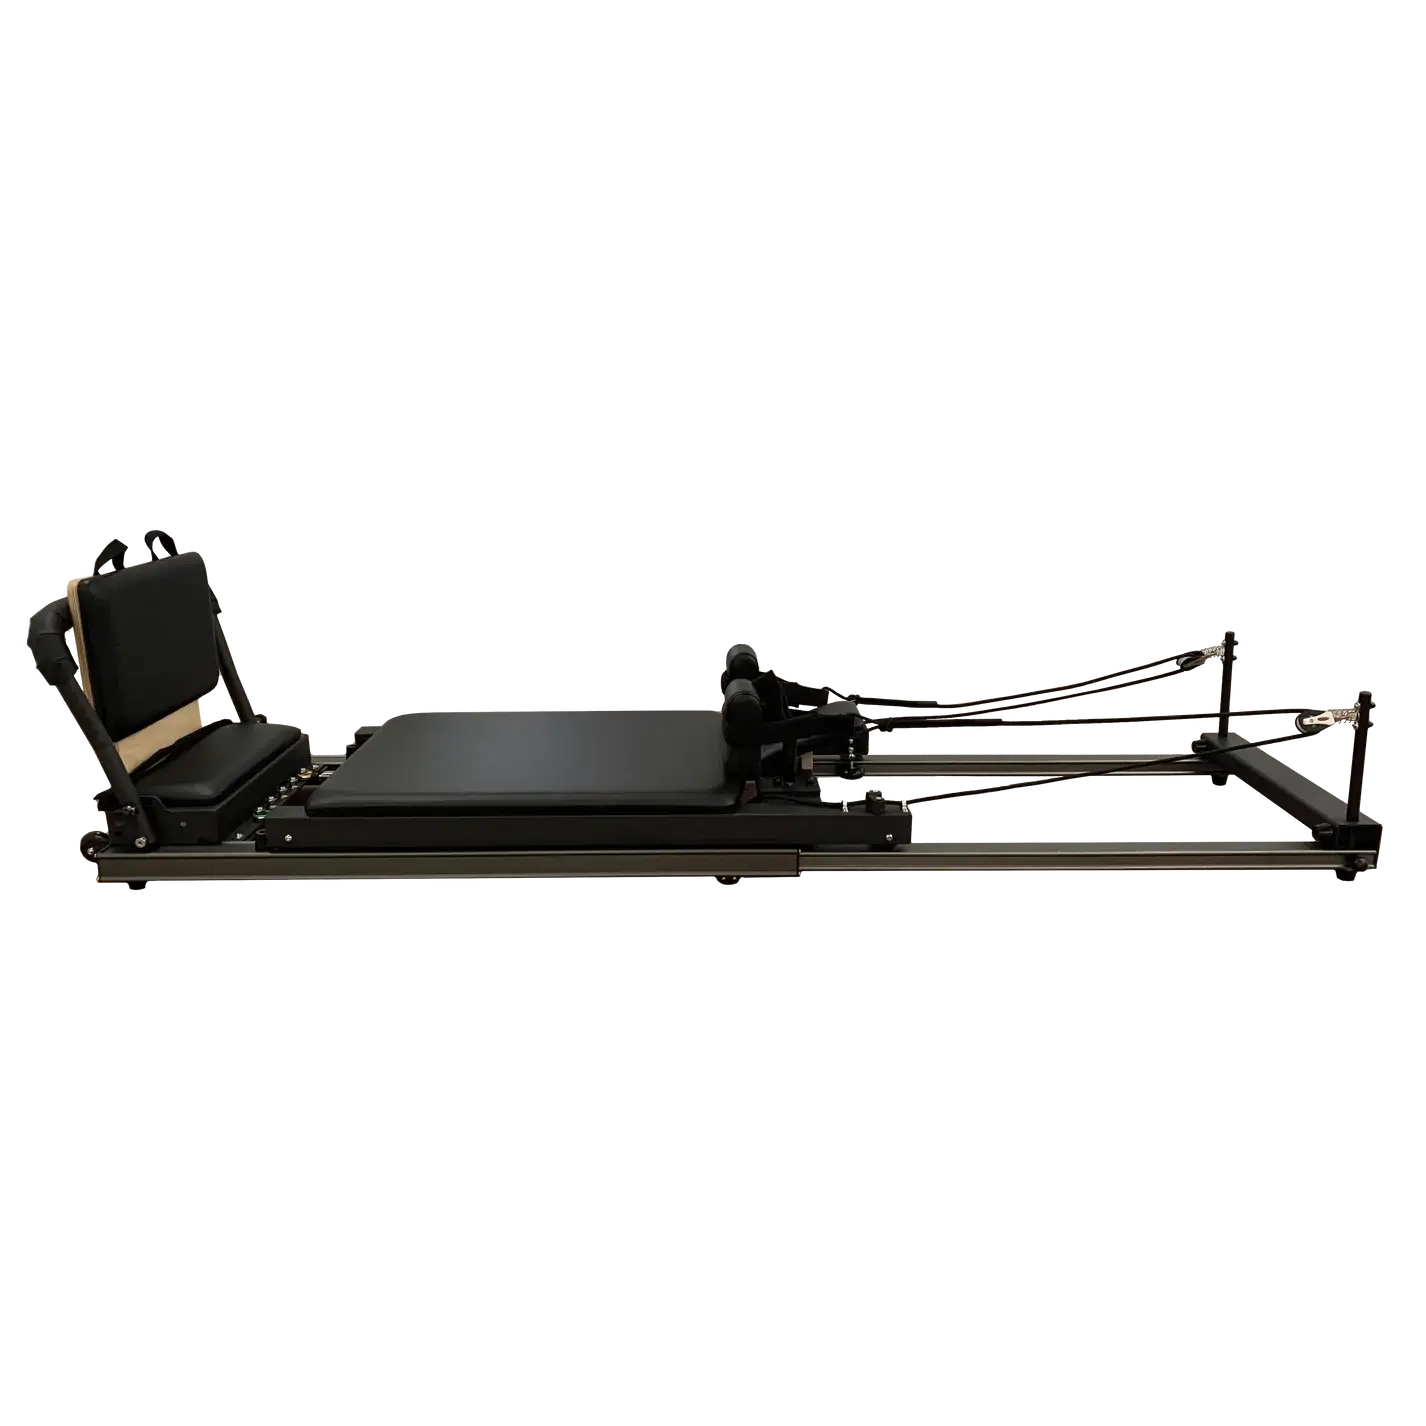 AUSSIE PILATES AP-FOLD Pilates Reformer Compact Easily Stored 